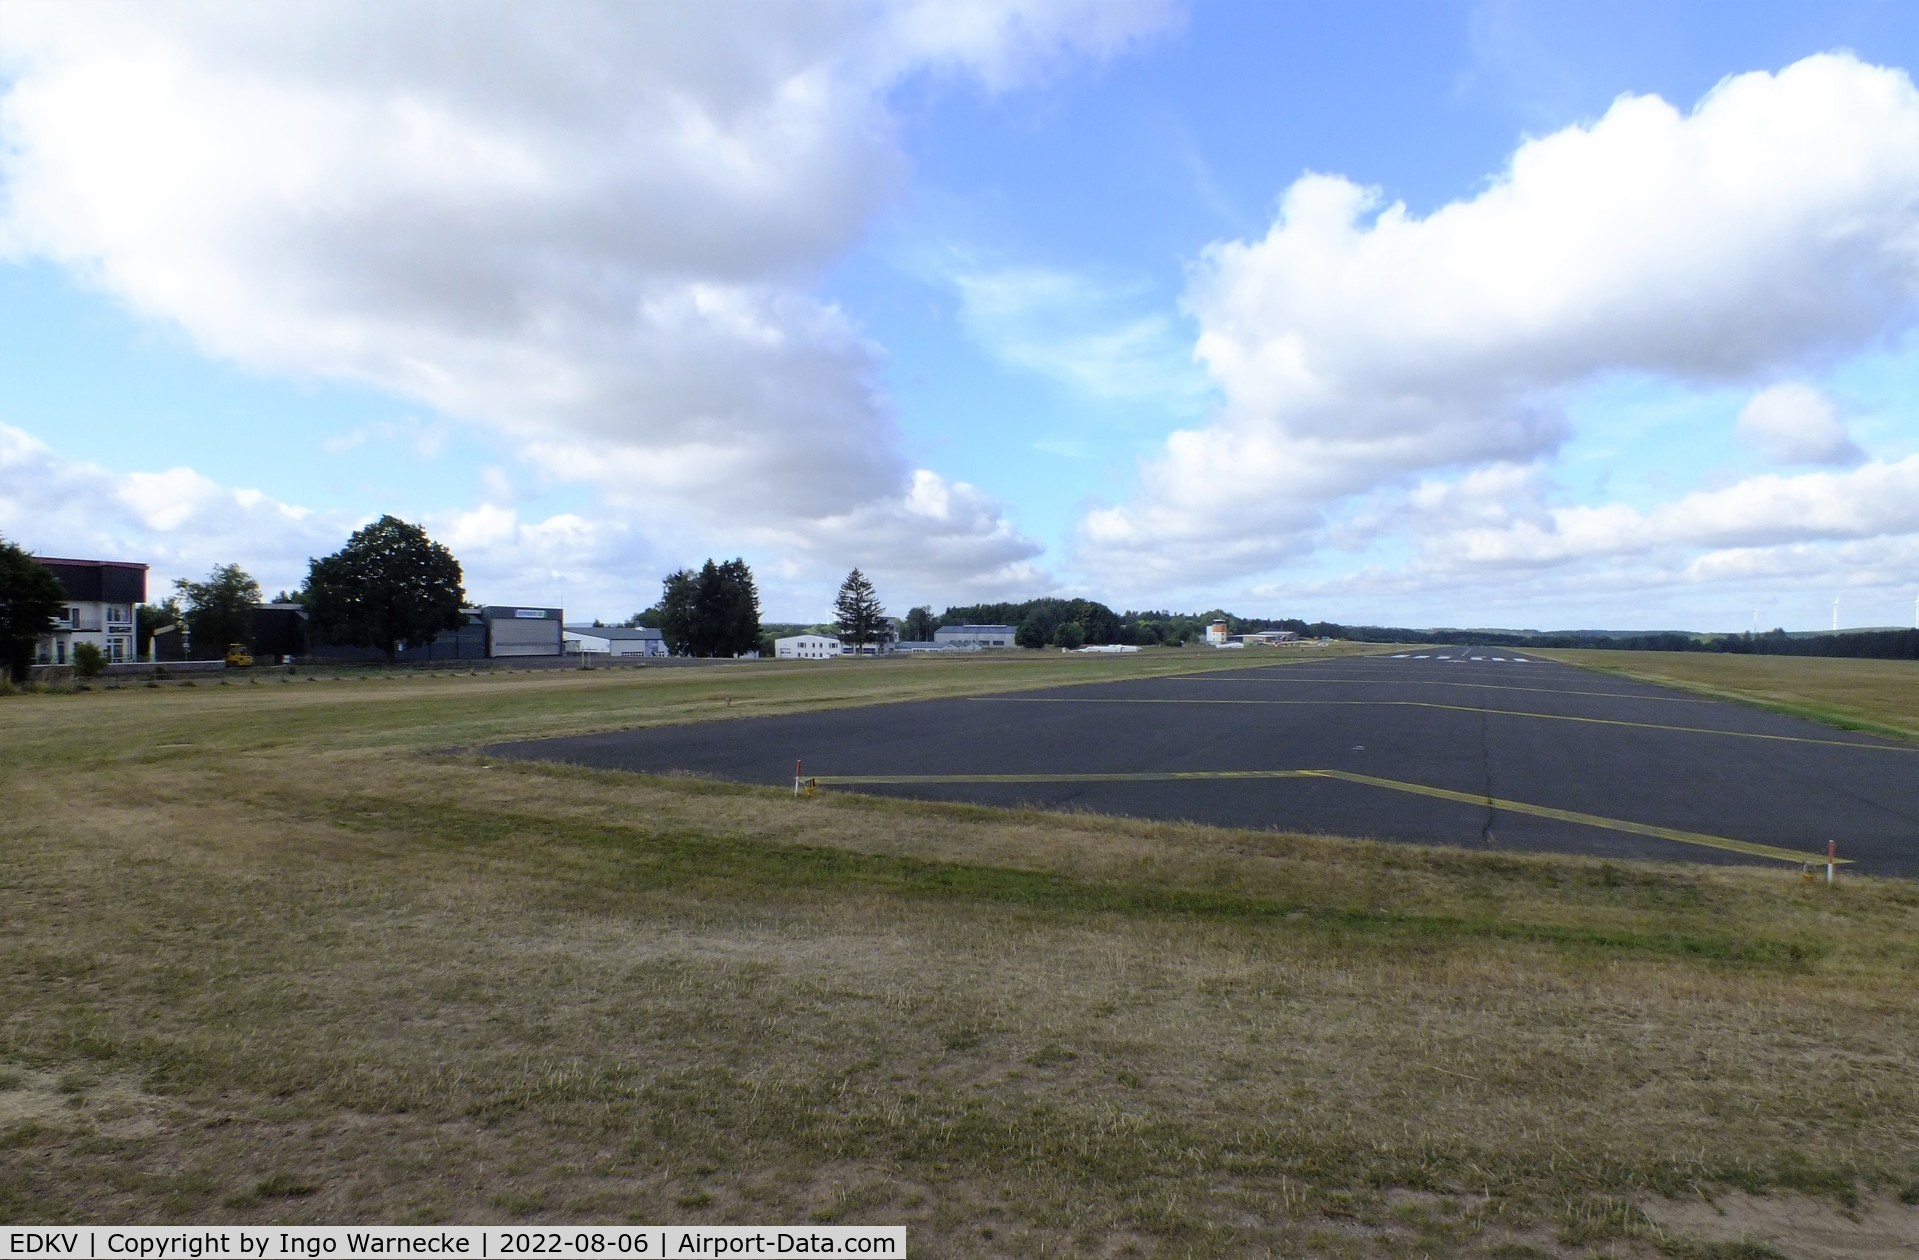 Dahlemer Binz Airport, Dahlem Germany (EDKV) - runway, buildings and hangars at Dahlemer Binz airfield seen from the east